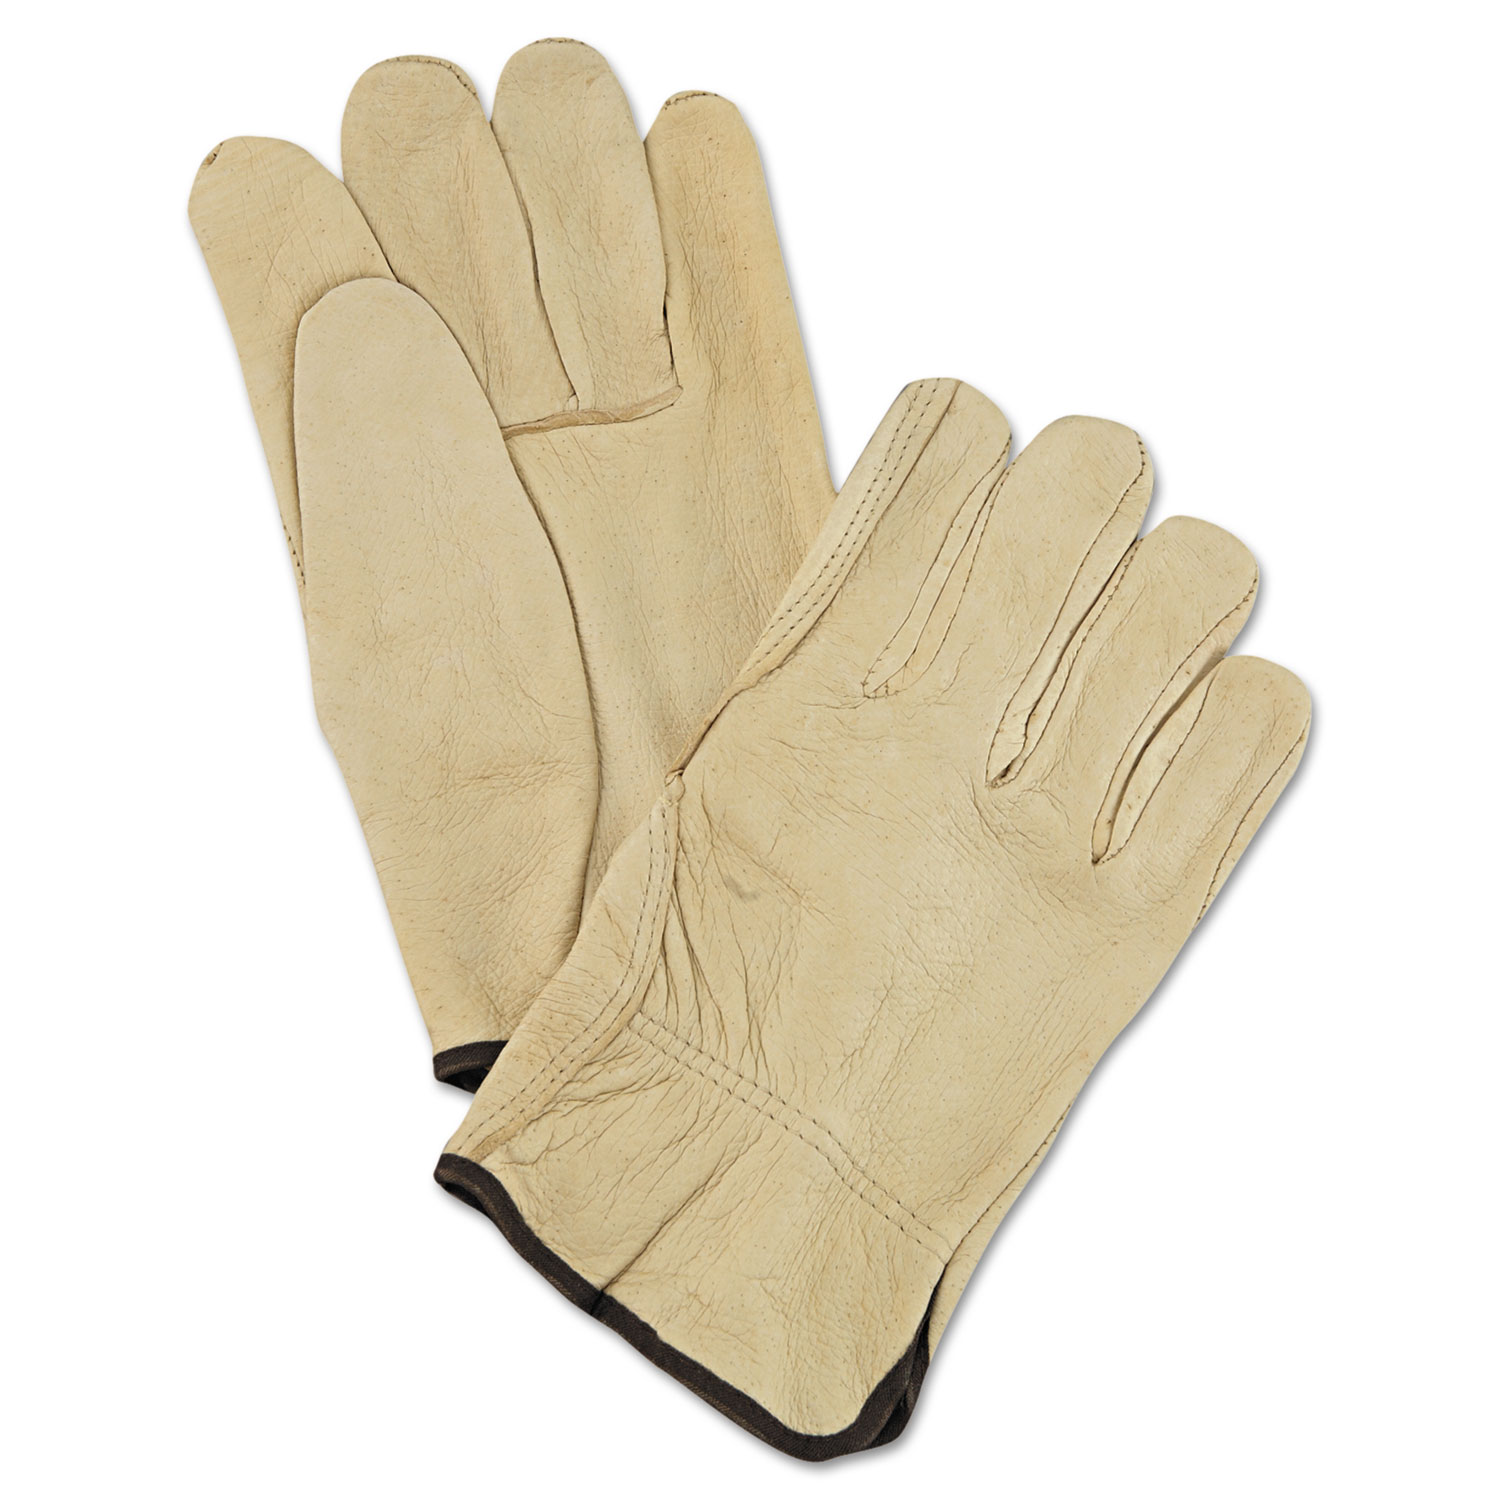  MCR Safety 3400L Unlined Pigskin Driver Gloves, Cream, Large, 12 Pairs (MPG3400L) 